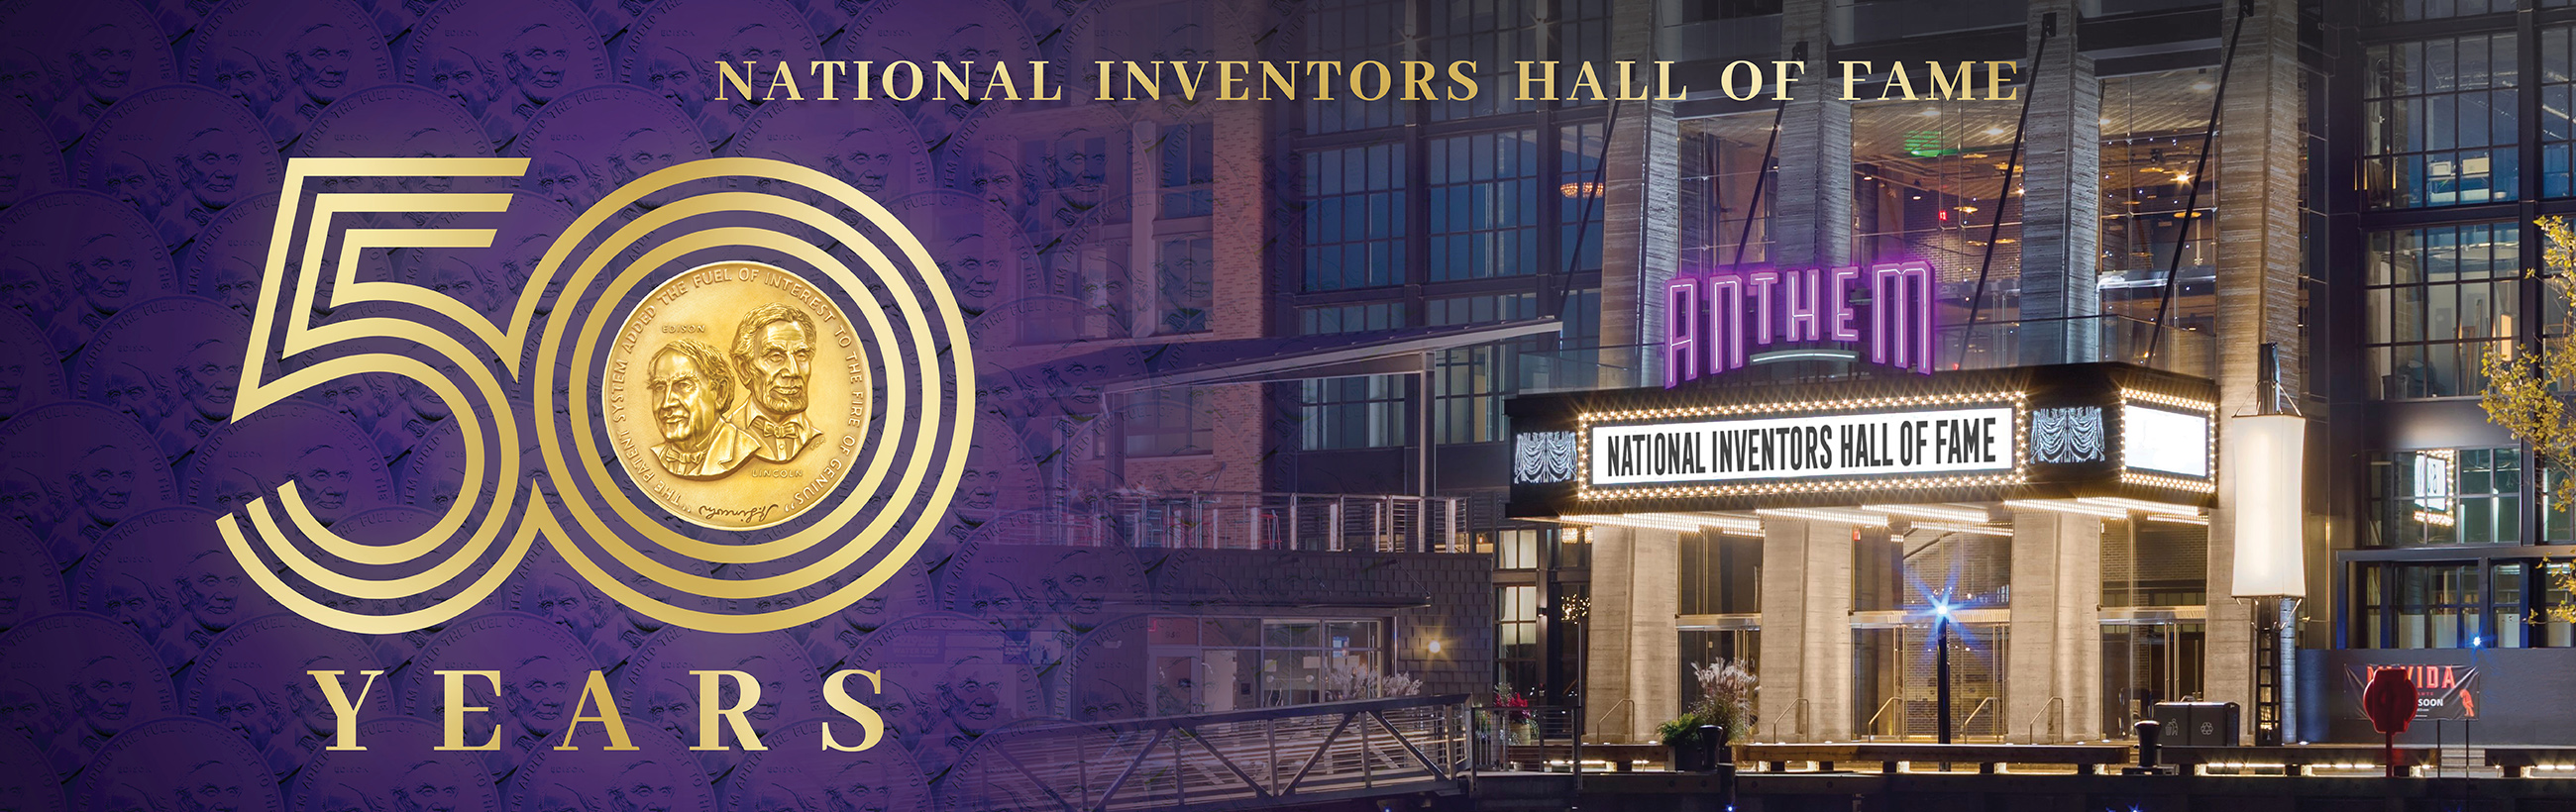 16 Innovators to be Inducted as the National Inventors Hall of Fame Class of 2023